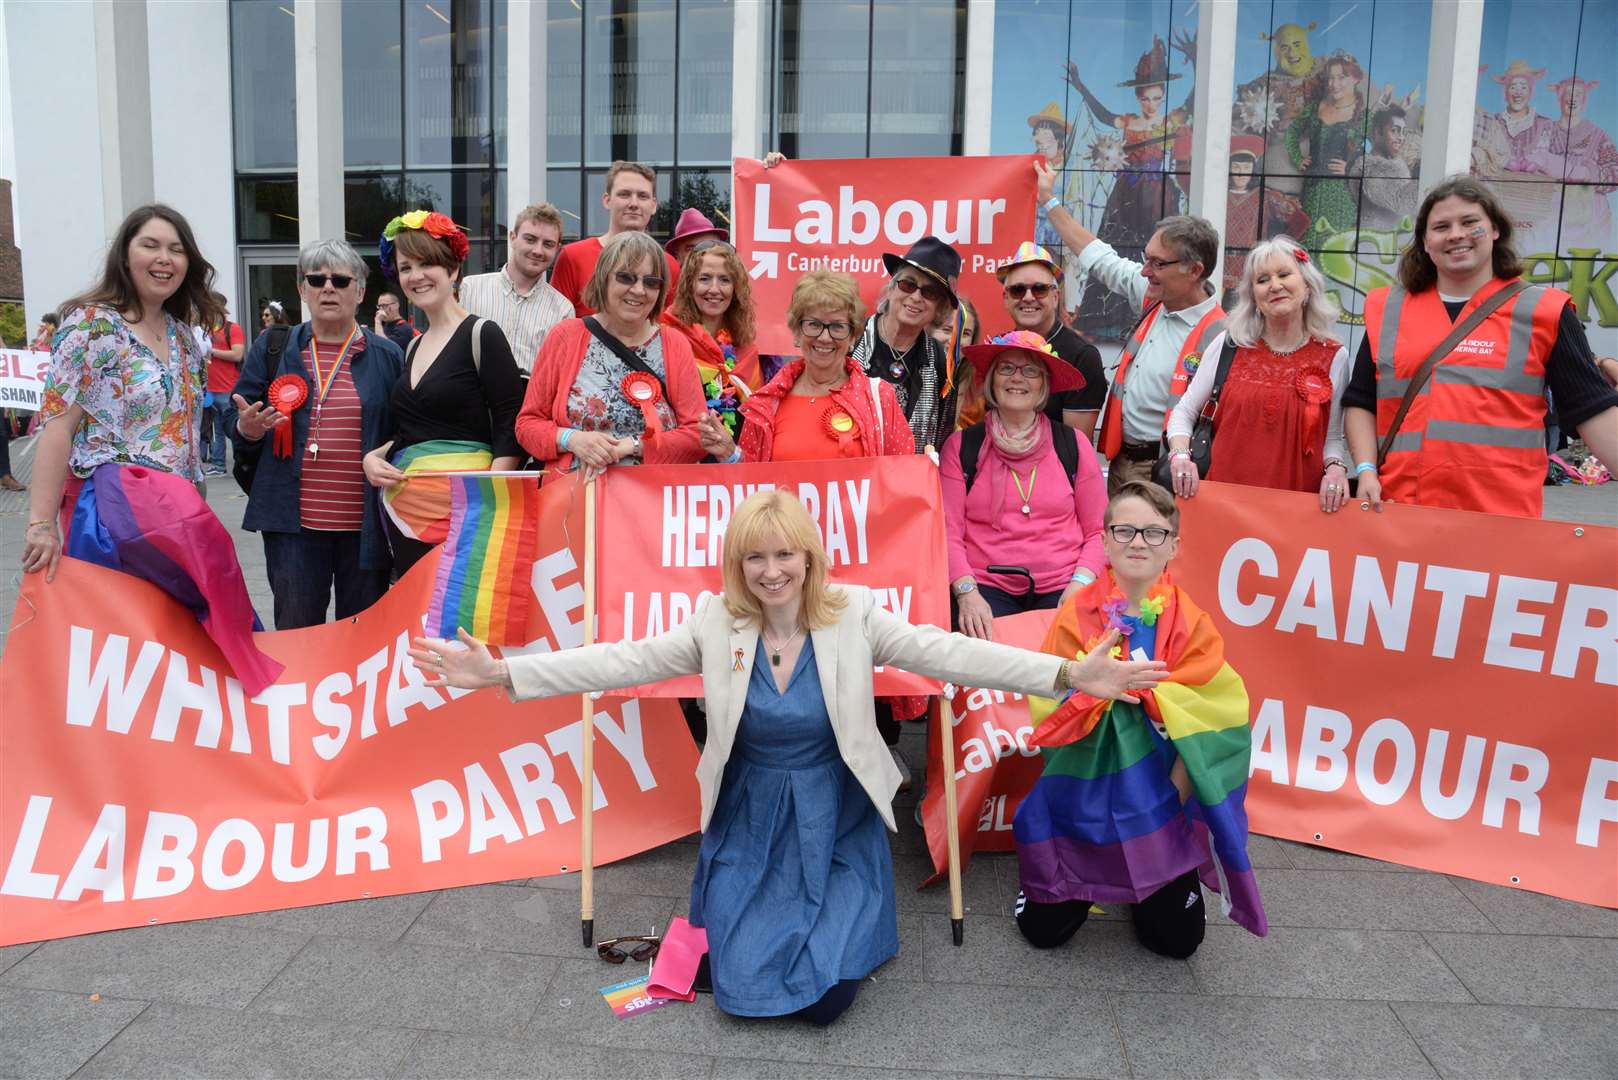 Rosie Duffield MP and local Labour groups at the Pride march last year